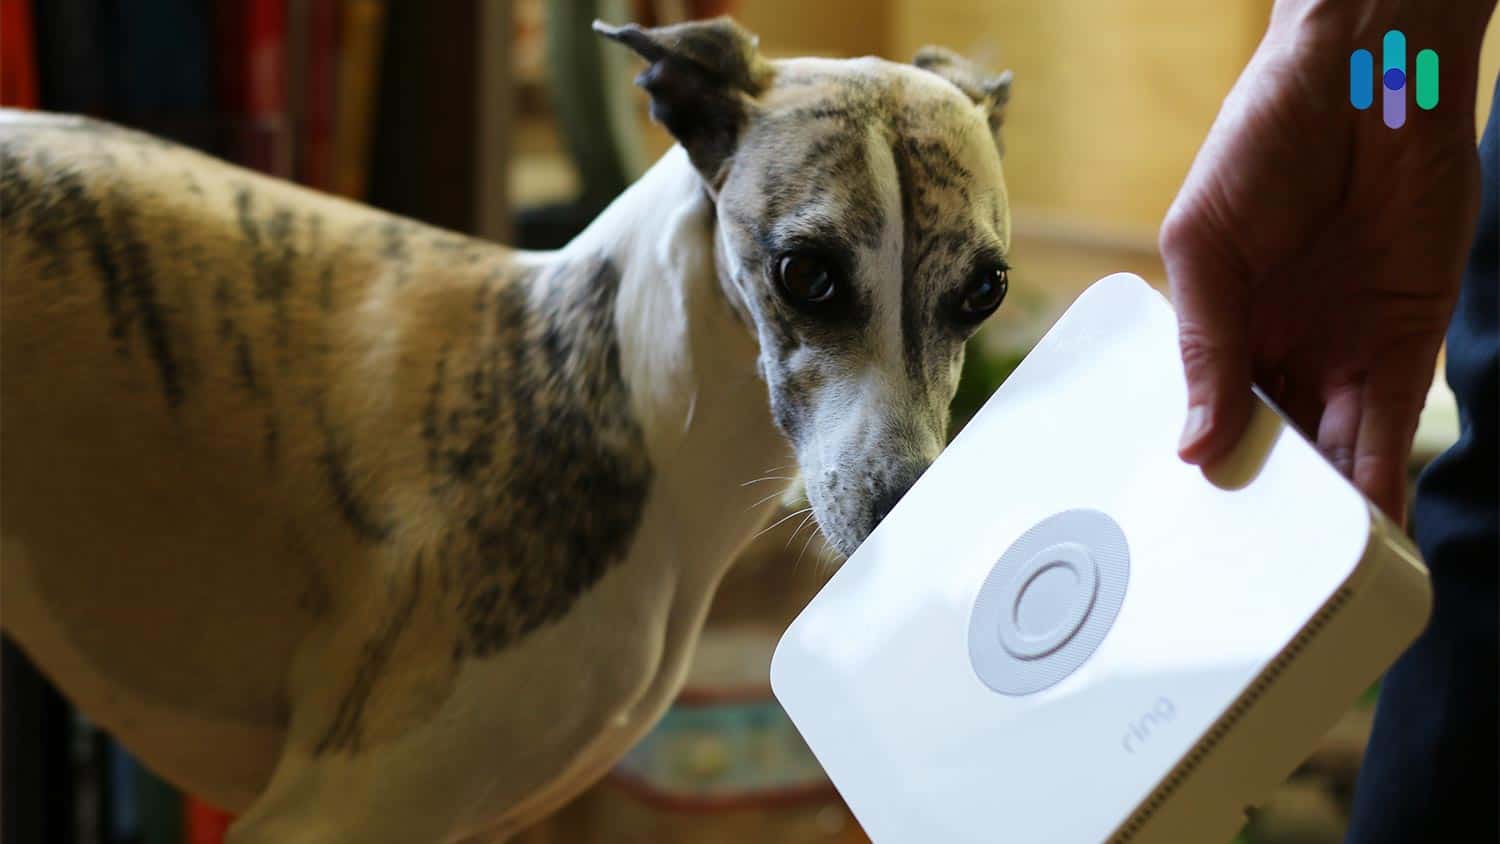 A dog looking at a Ring Alarm system